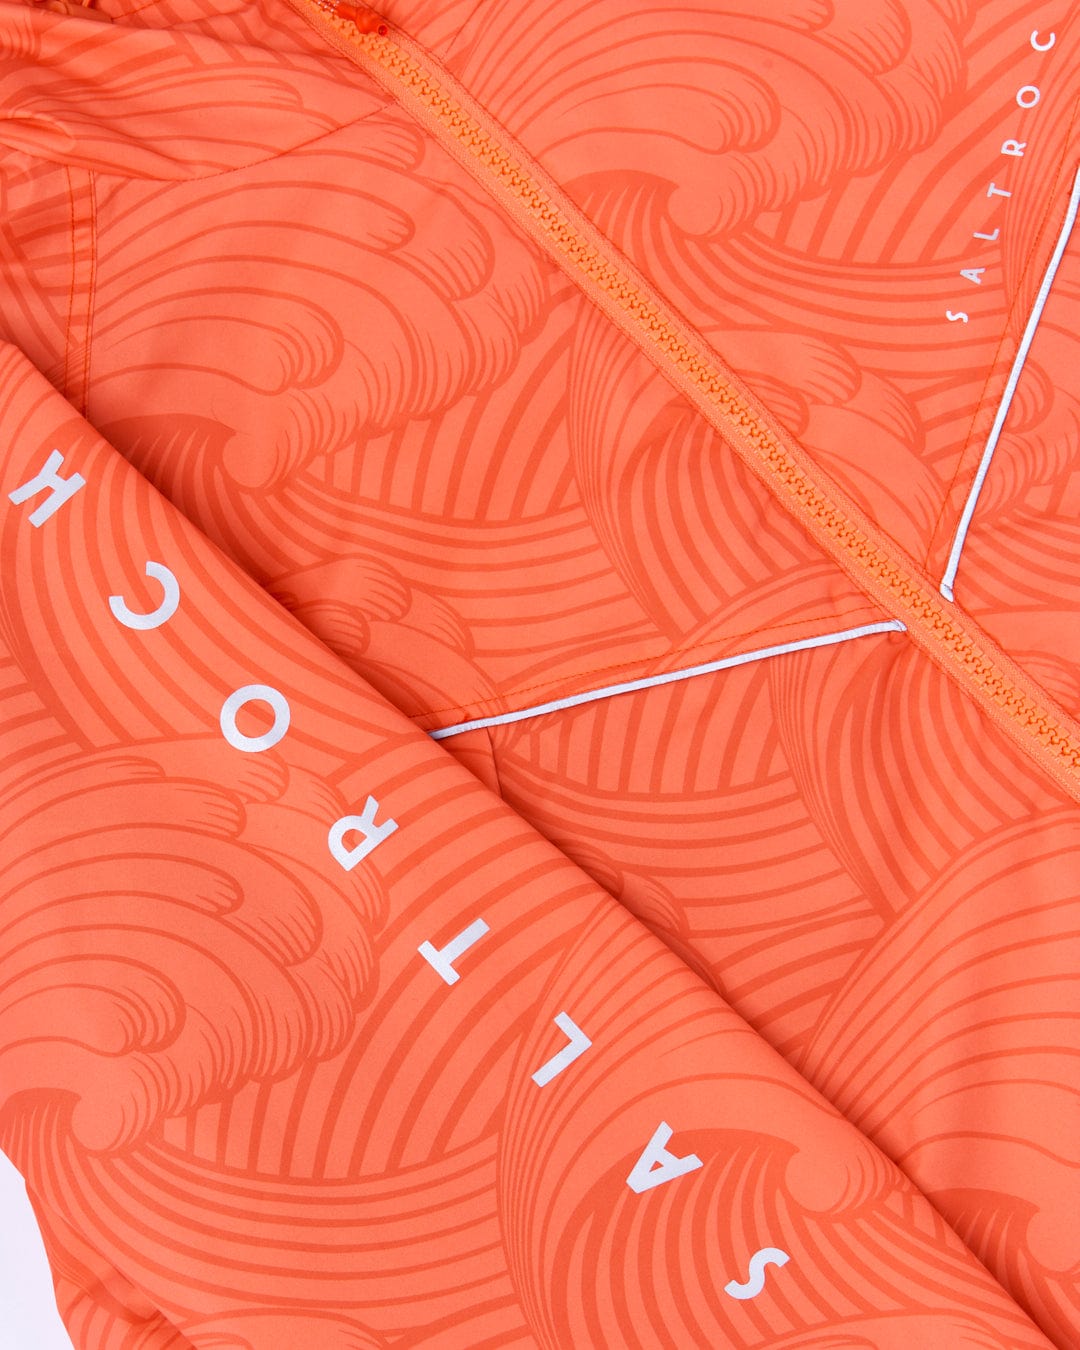 Close-up view of a bright orange textured fabric with a pattern, featuring the word "saltycrew" integrated into the design, crafted from Saltrock's Recycled Four Seasons Changing Robe in Light Orange.